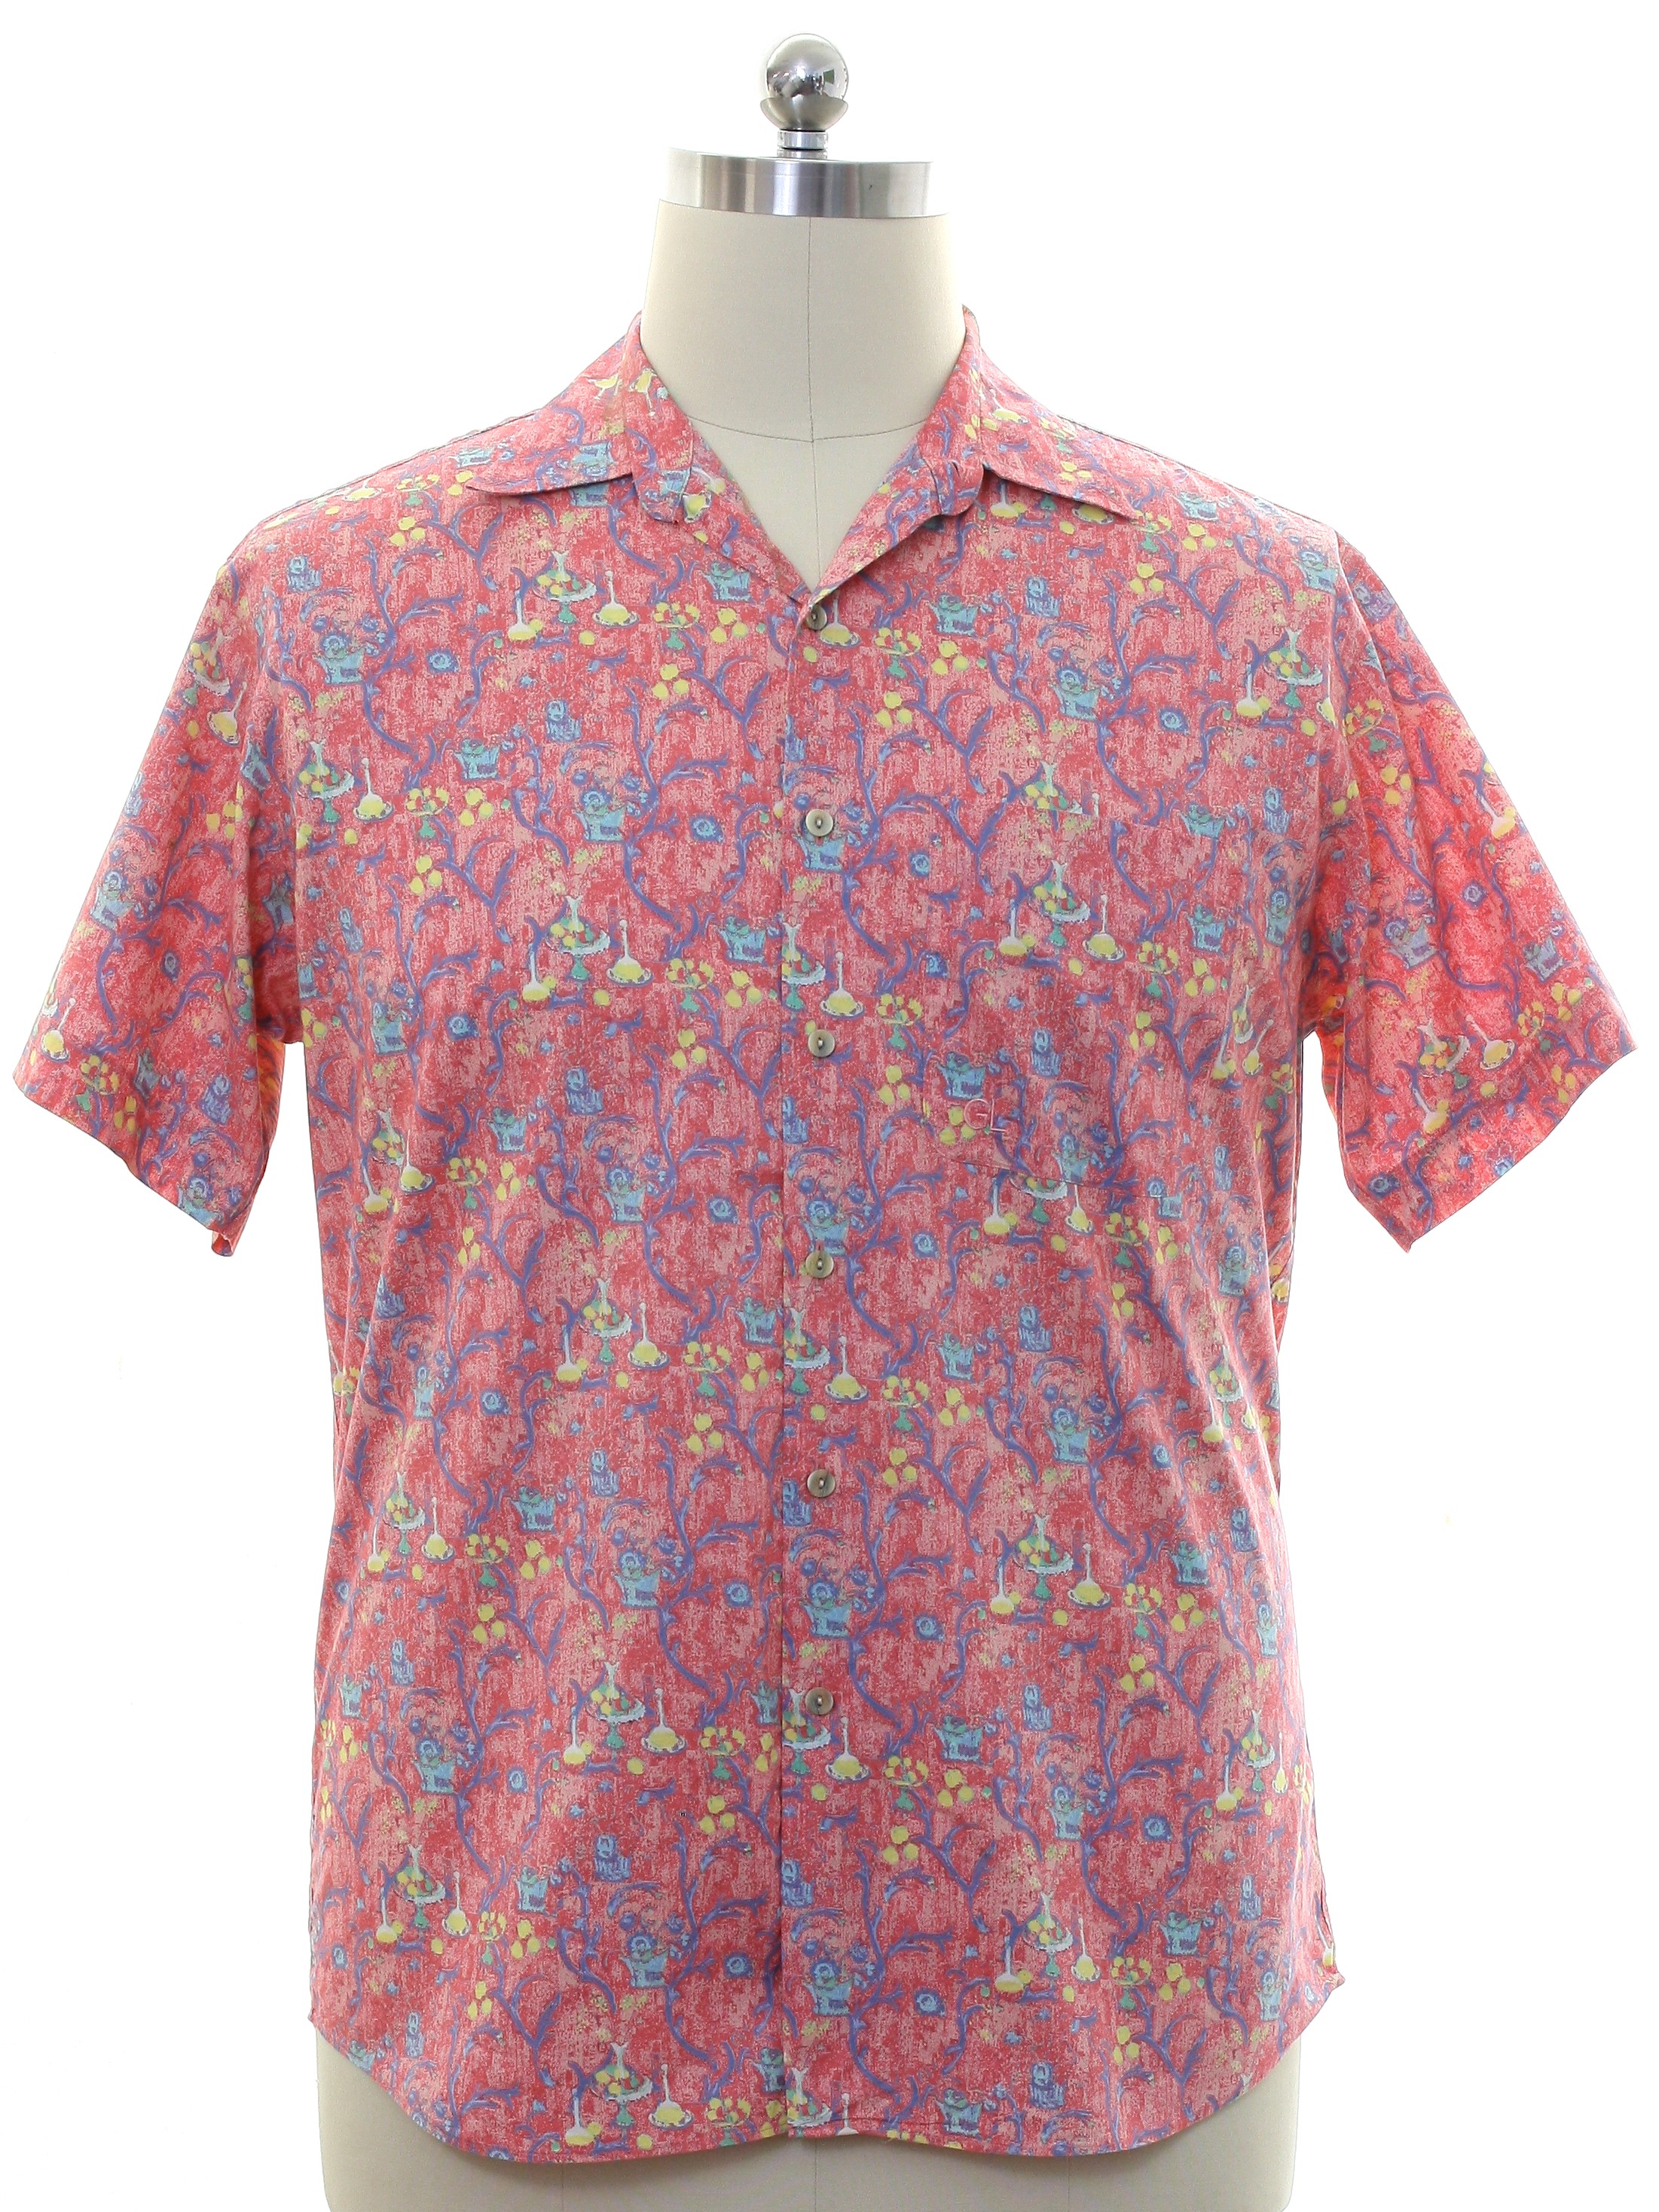 Shirt: Late 80s or Early 90s -Guy Laroche Paris- Mens shades of pink ...